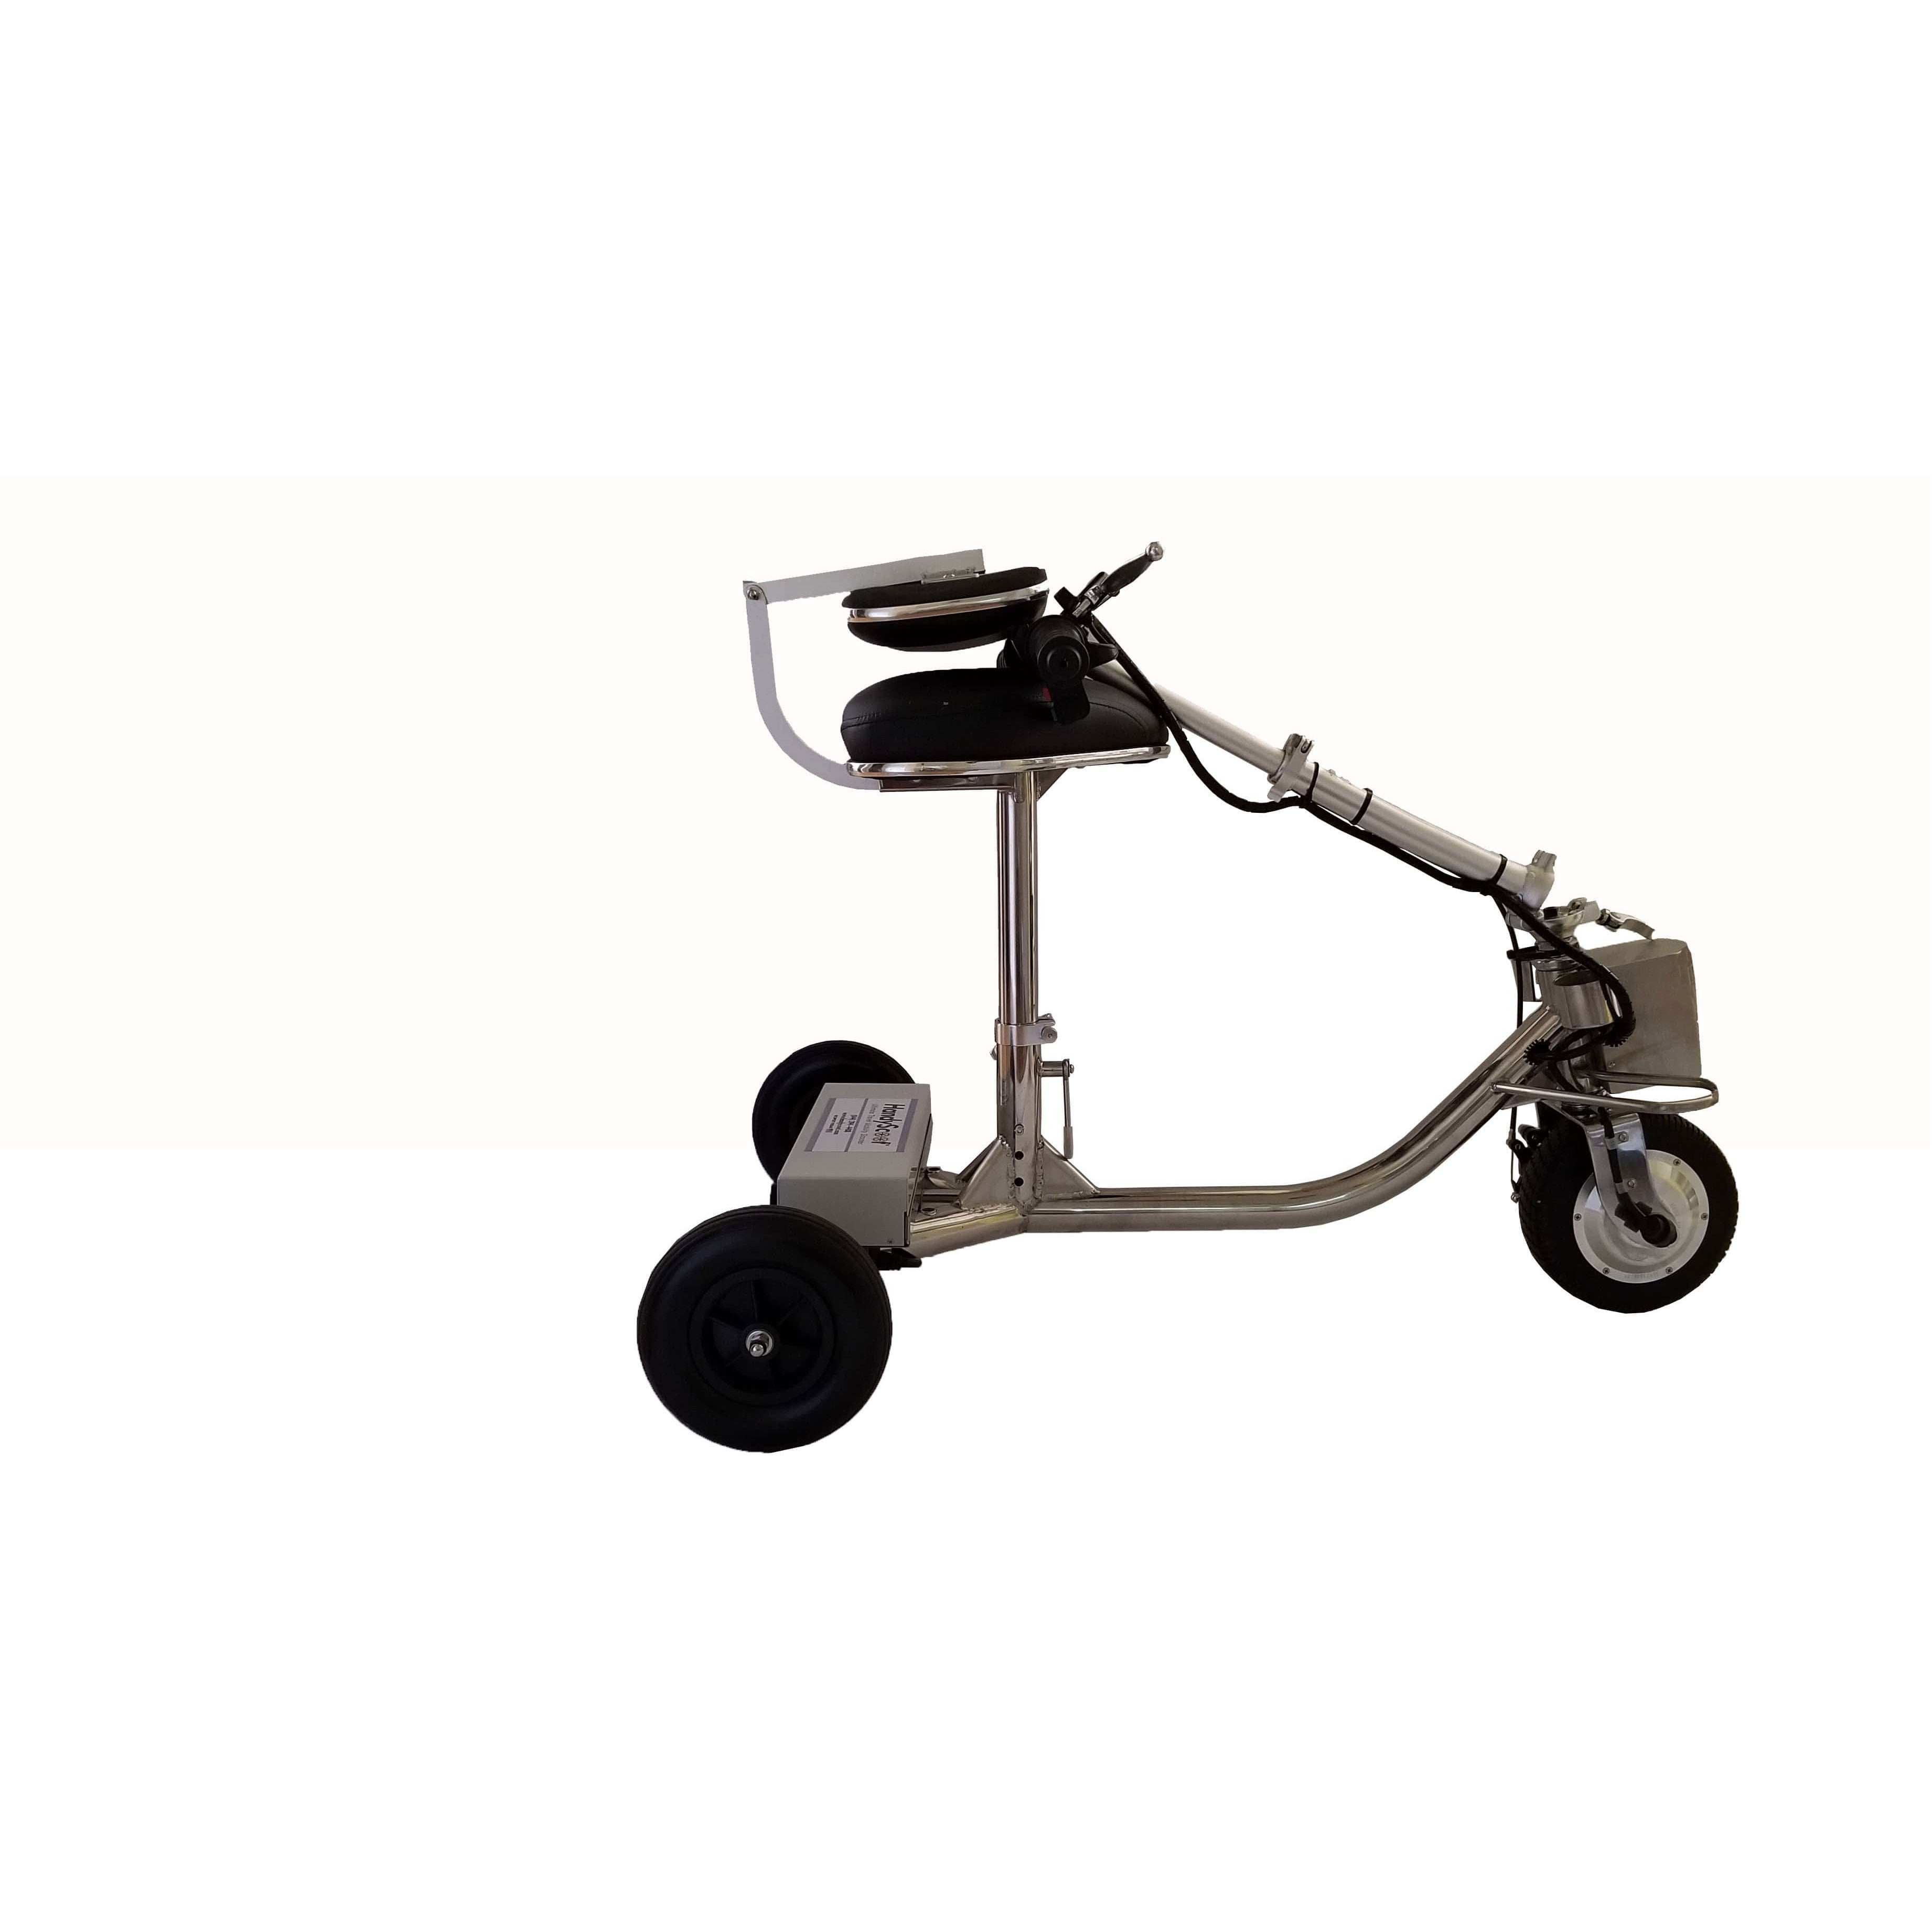 HandyScoot 36V/8Ah 288W Travel Folding 3-Wheel Mobility Scooter HS101